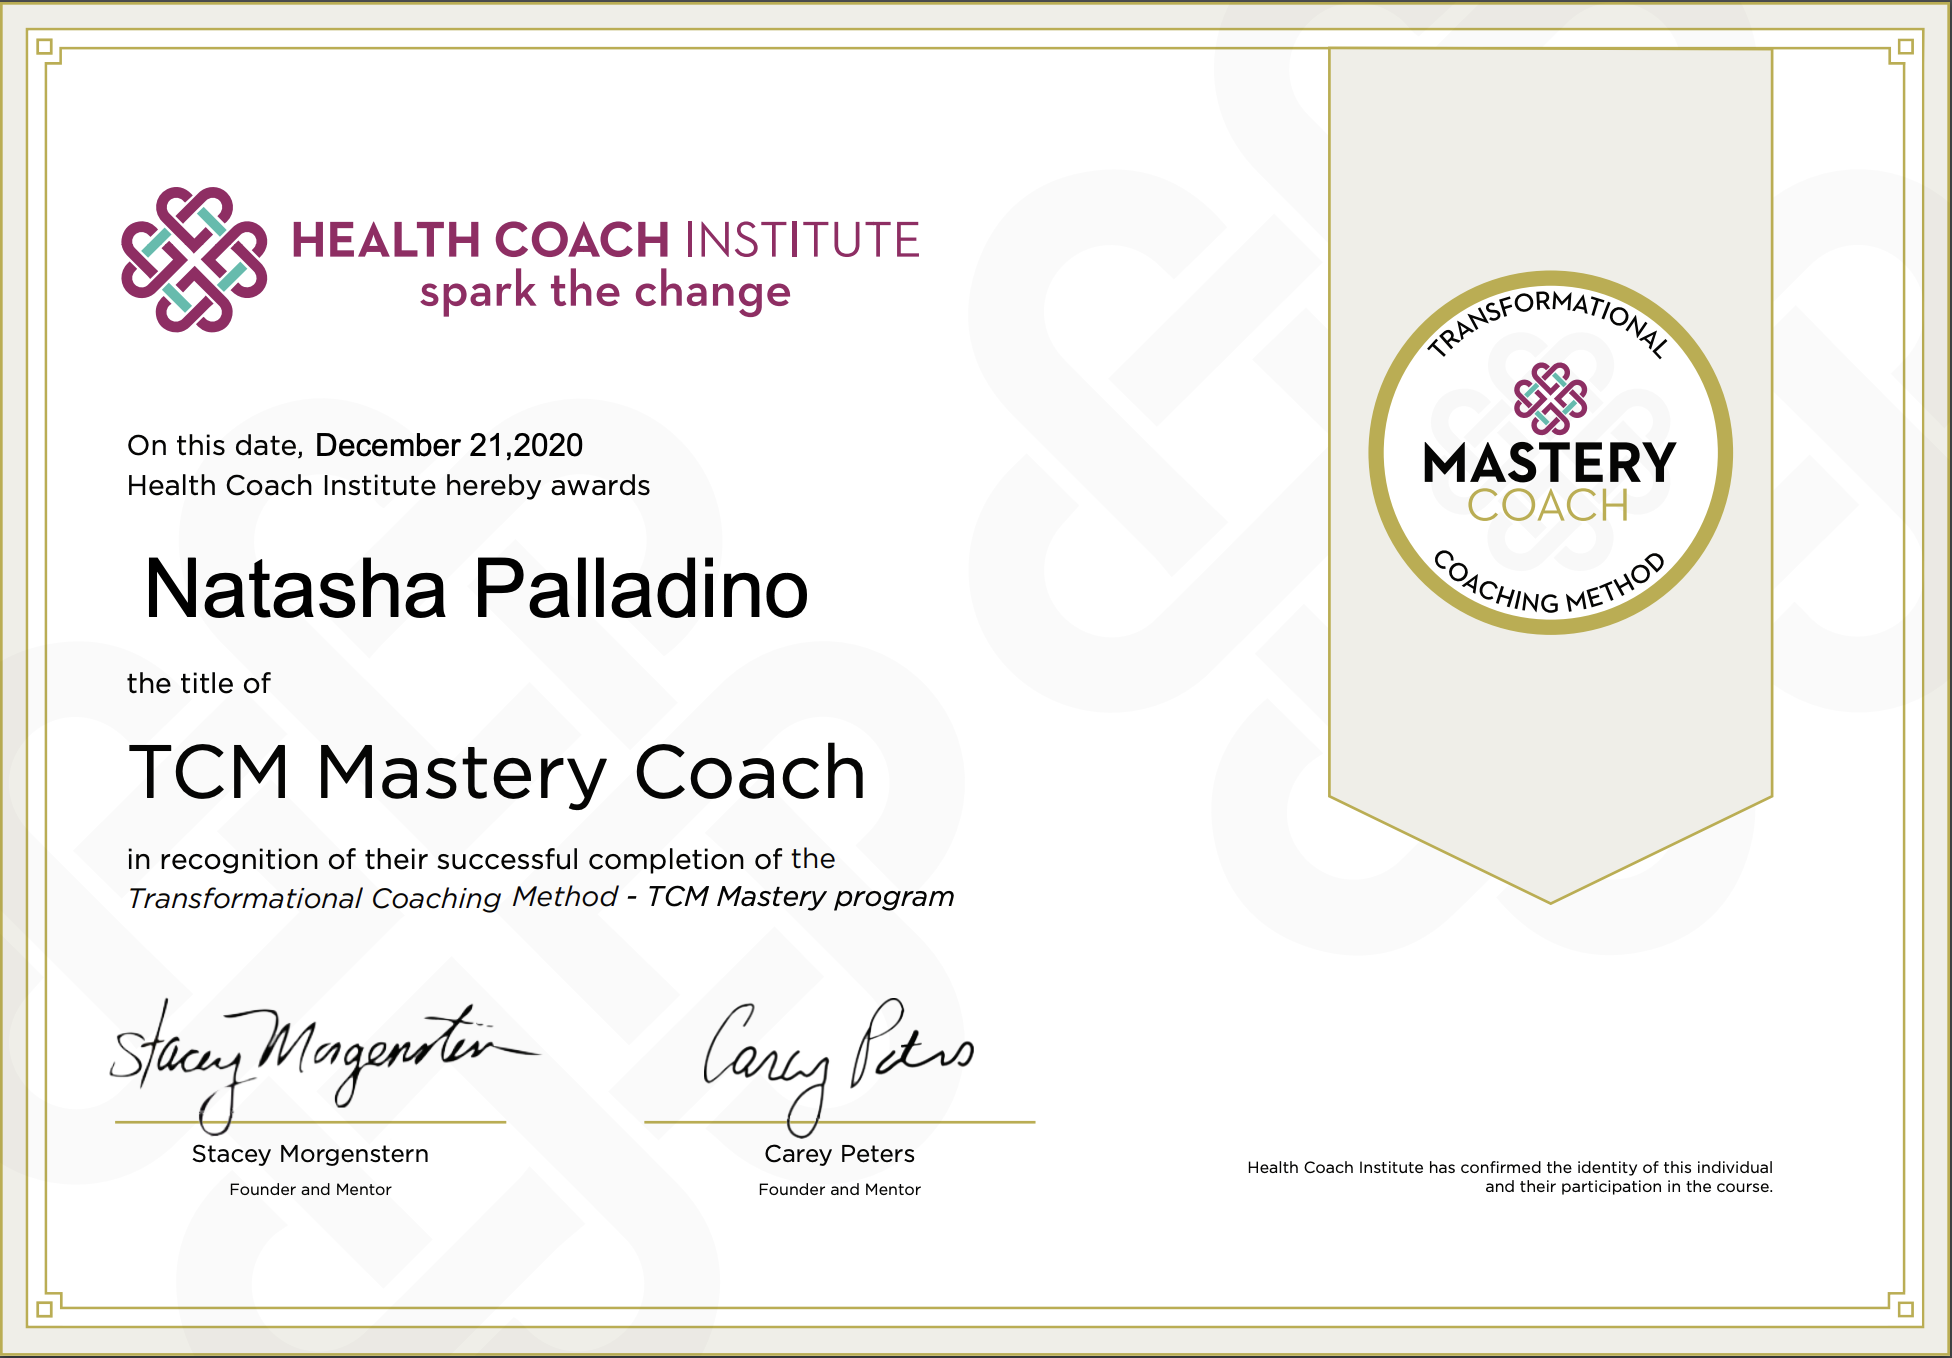 Certificate for TCM Mastery Coach